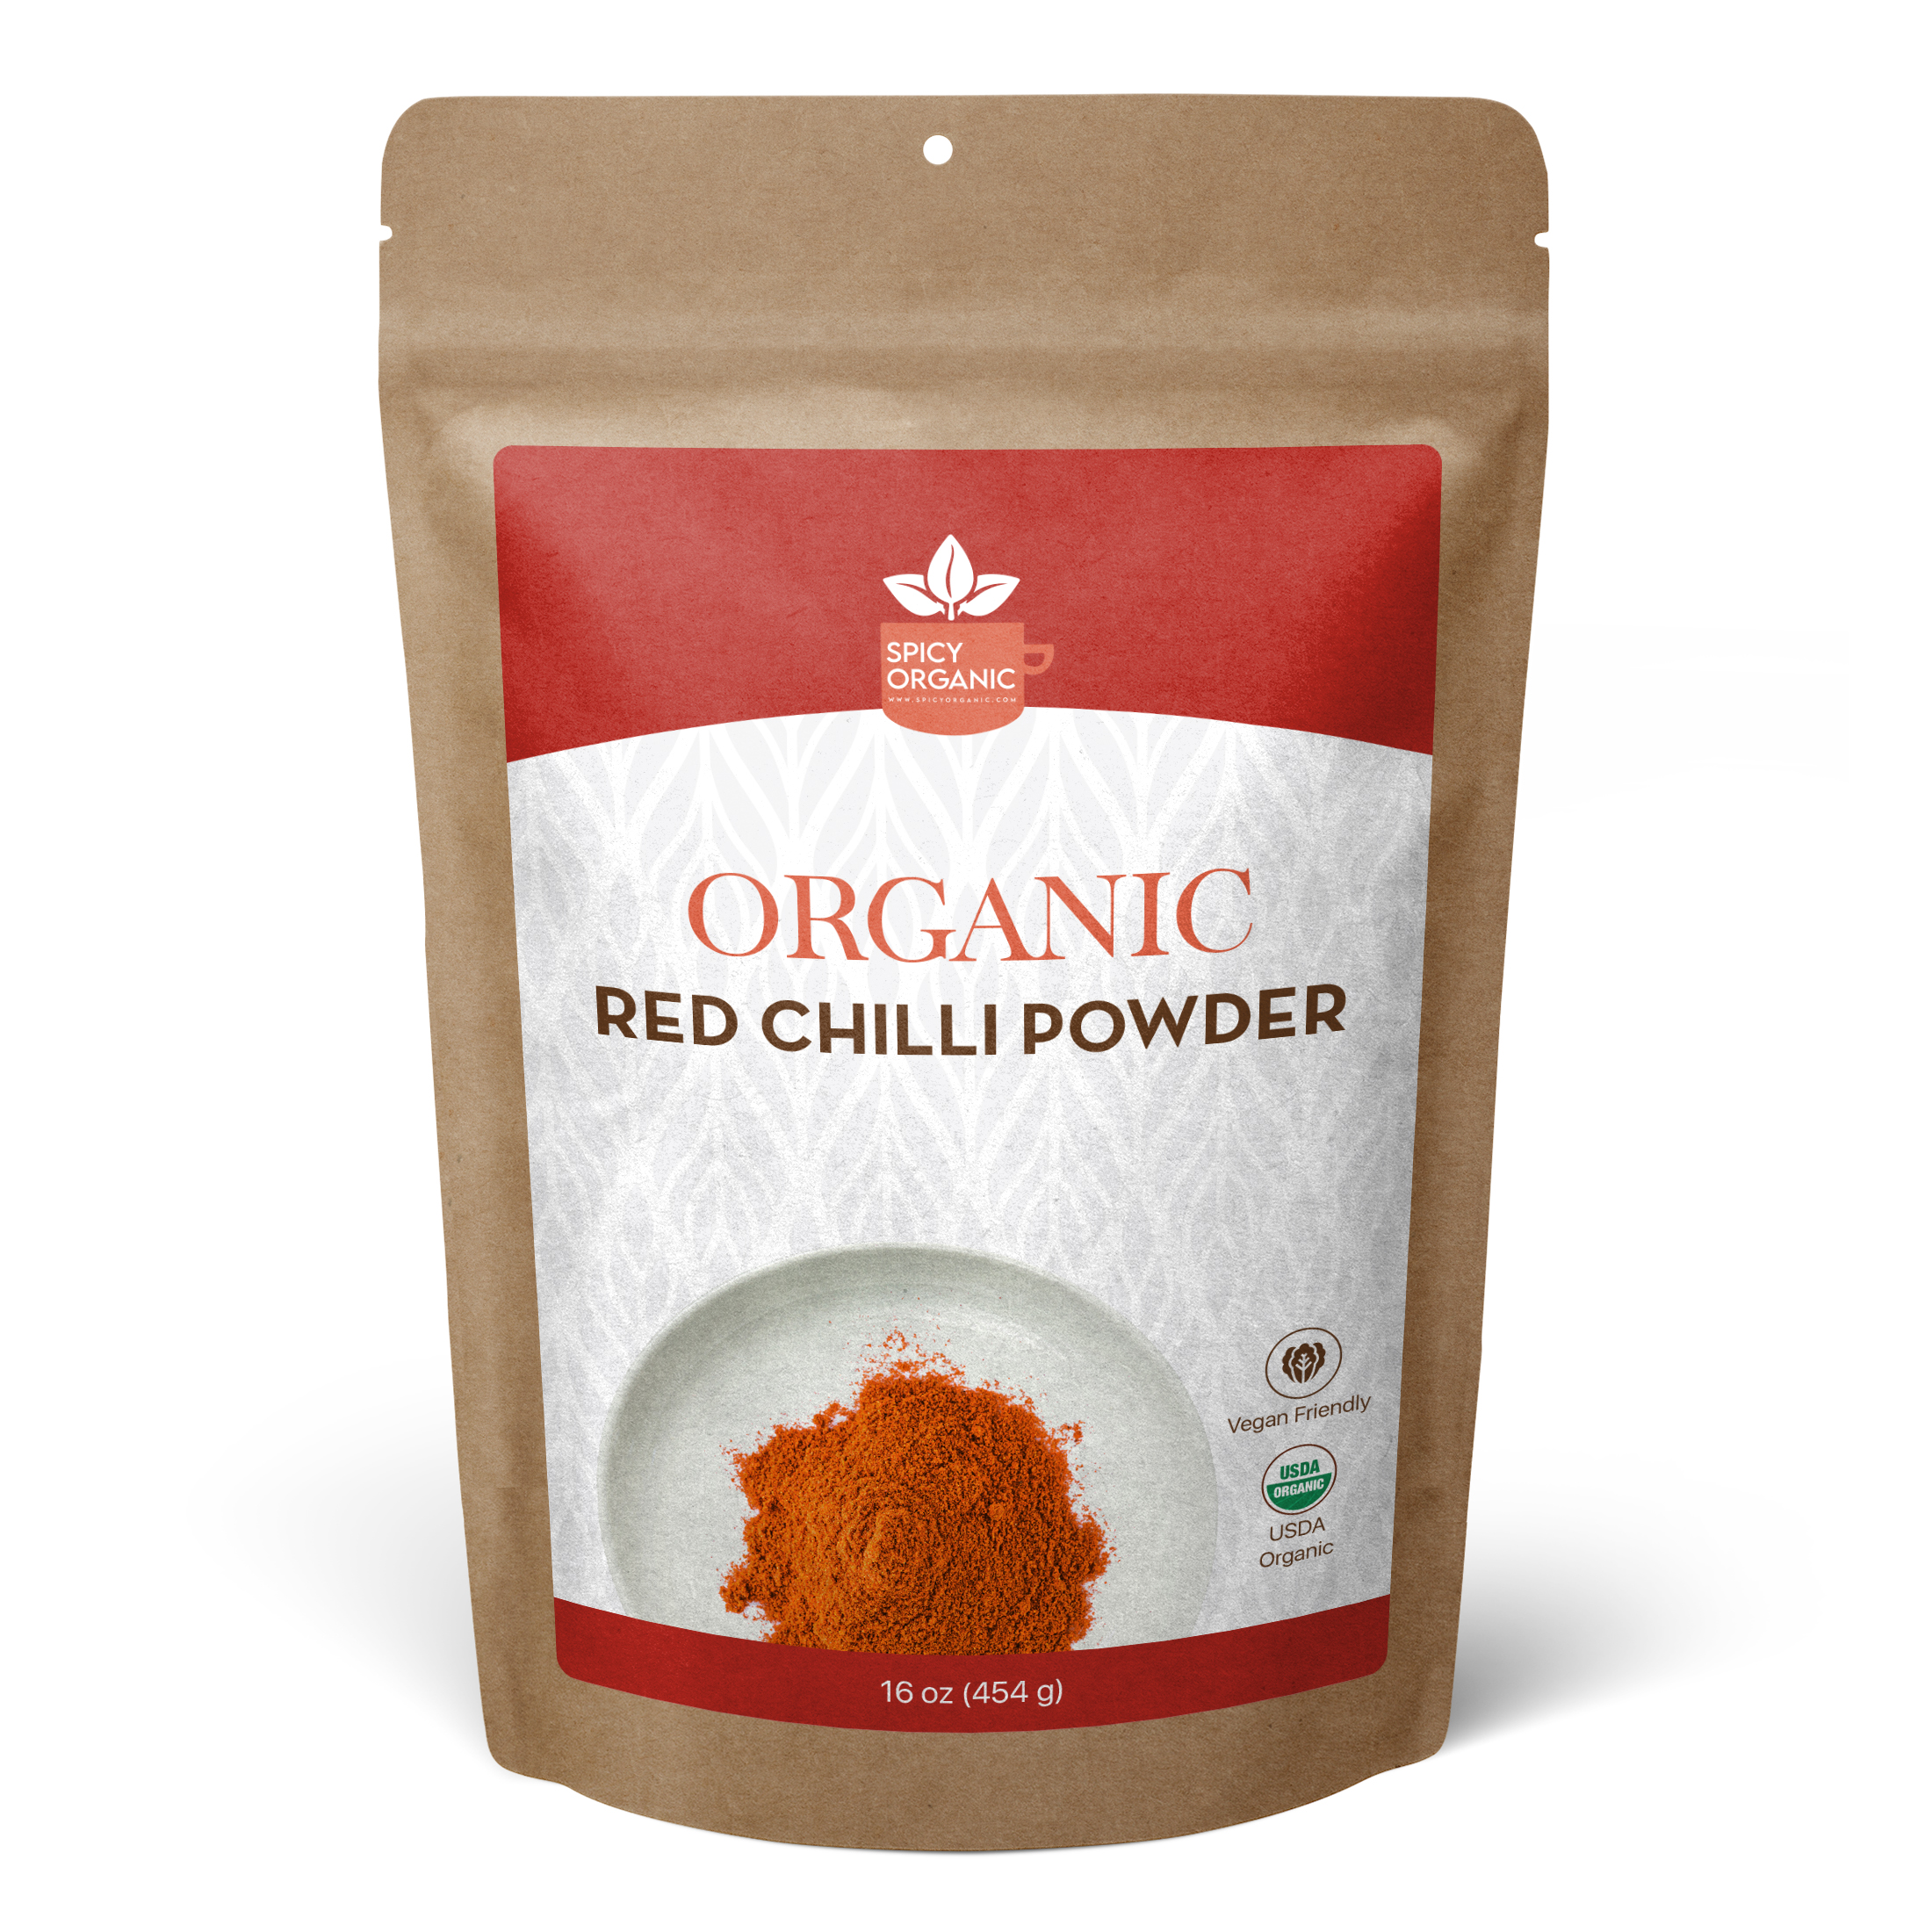 Organic Red Chili Powder: 100% Pure and Natural, Perfect for Spicy Cooking- Add Heat and Flavor to Your Dishes - image 1 of 3